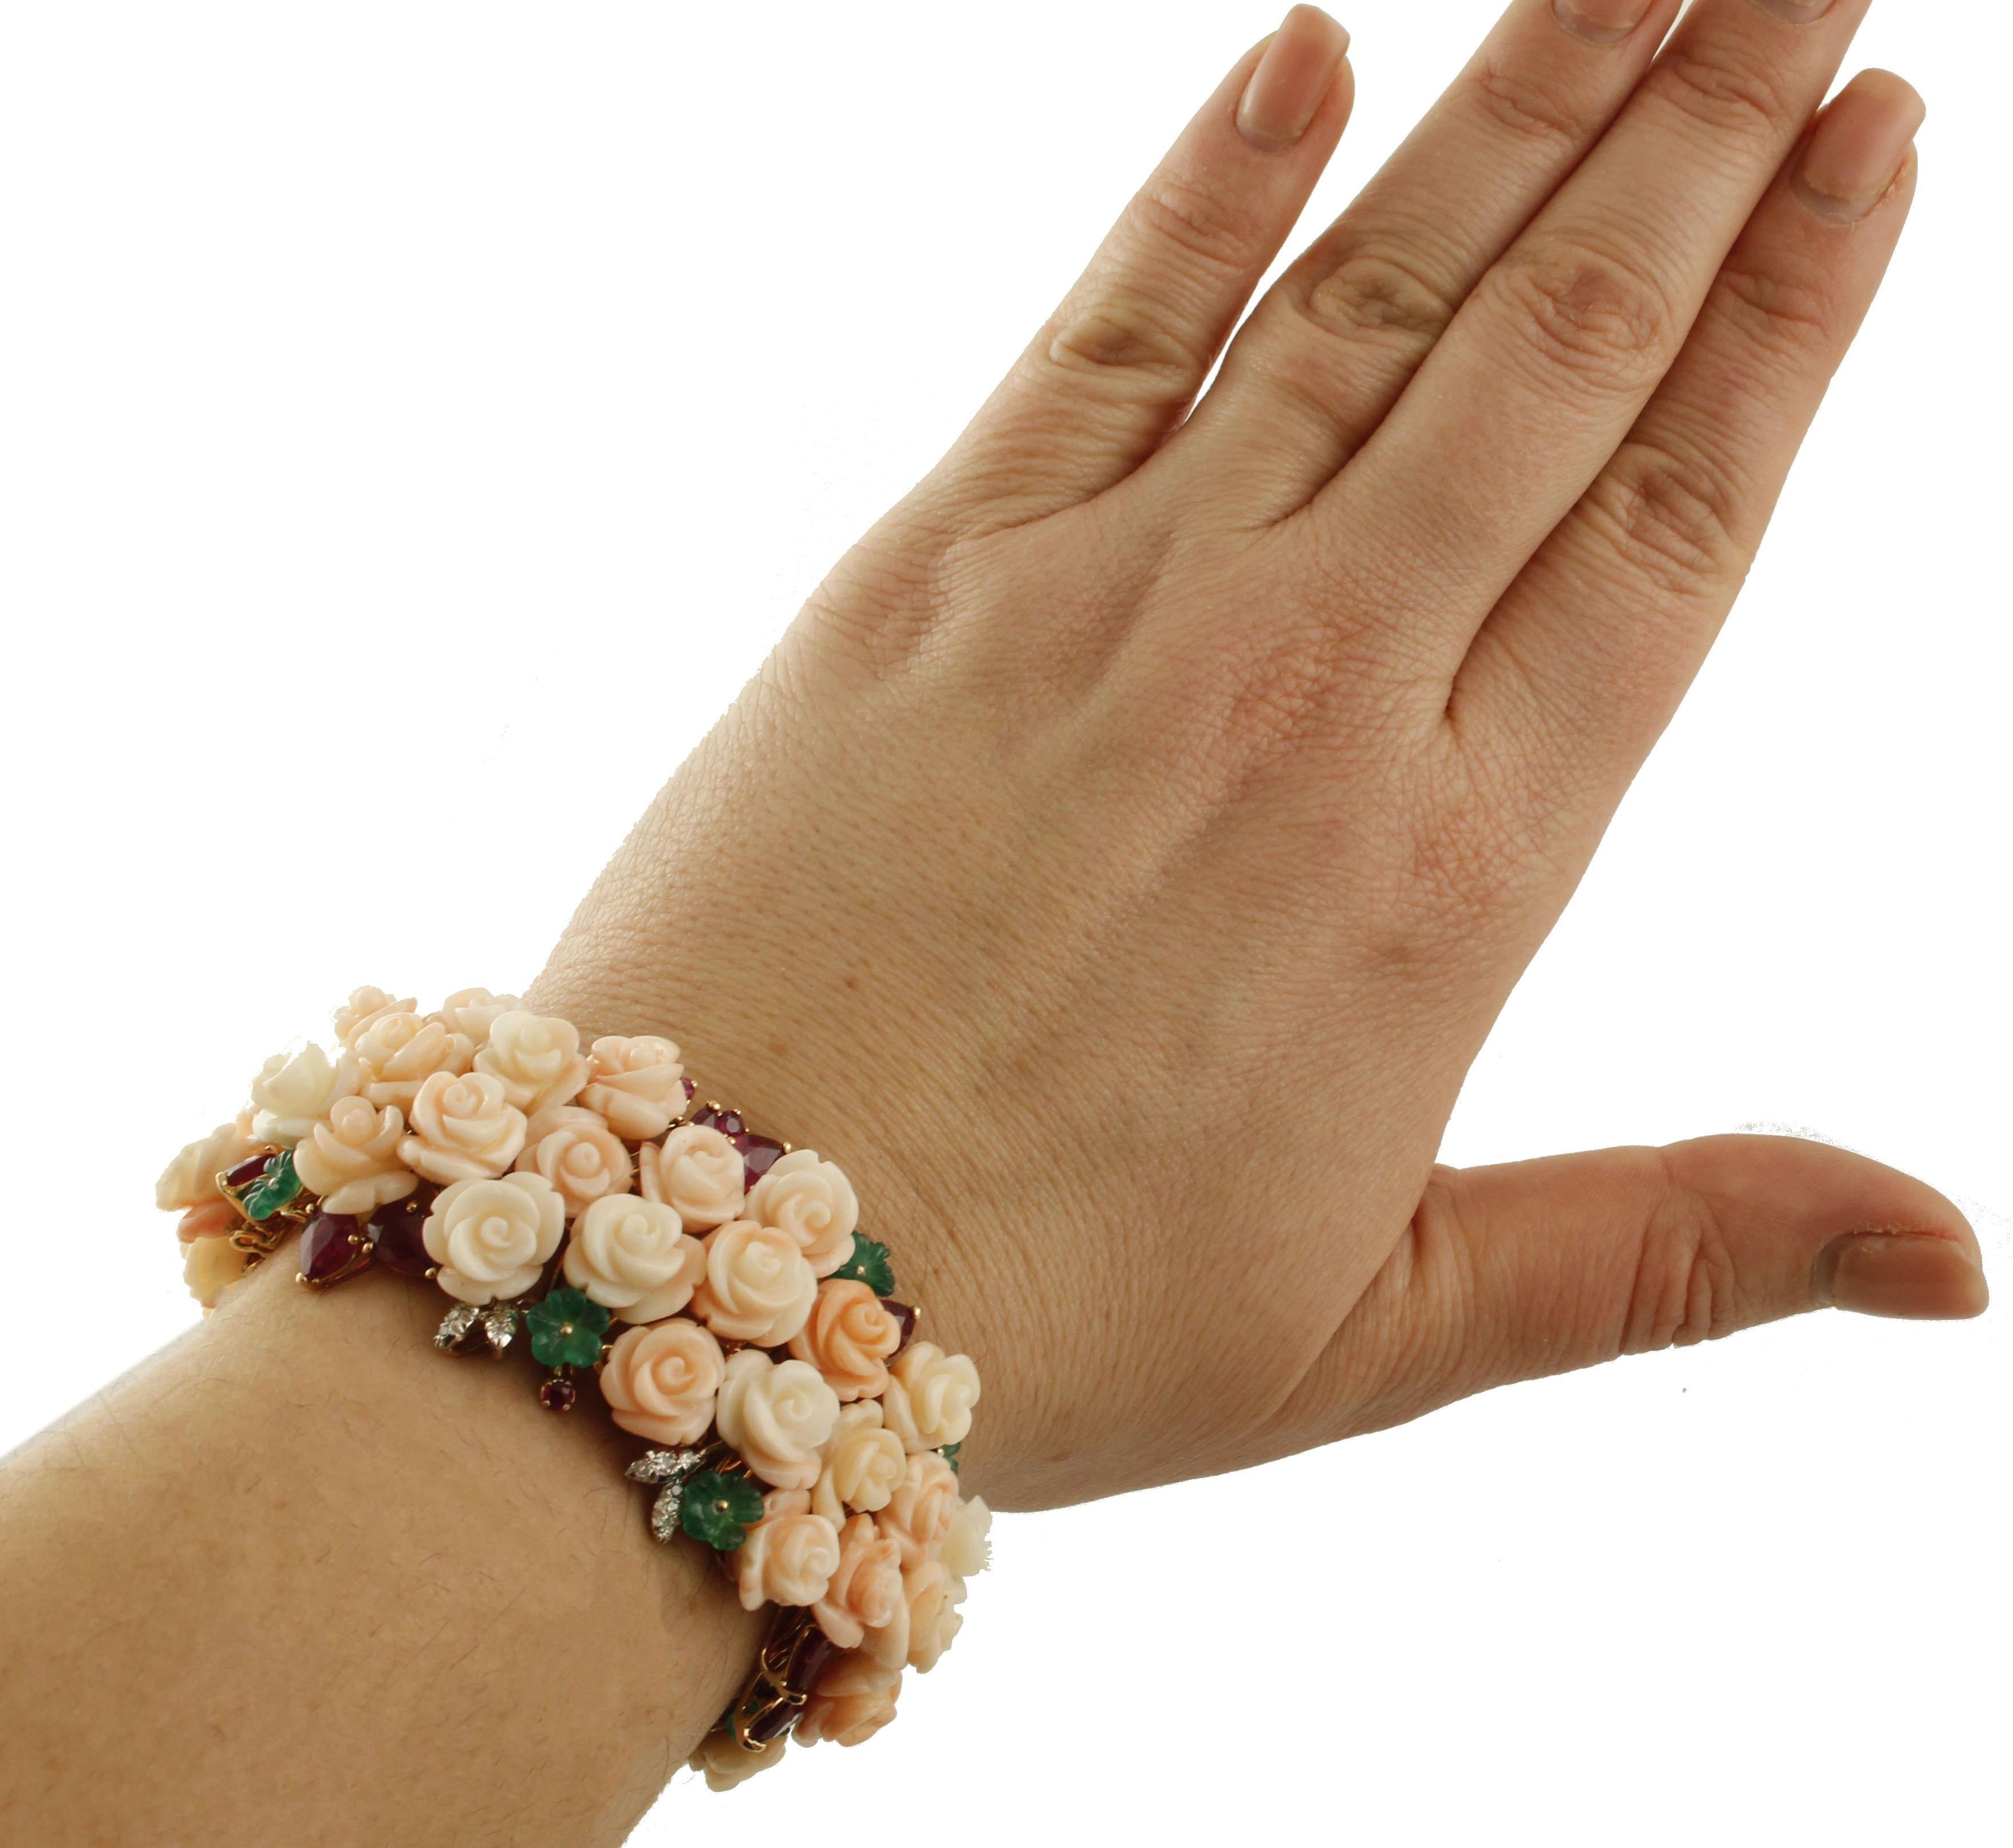 Brilliant Cut Diamonds, Green Agate, Rubies, Pink Coral Roses, Rose and White Gold Bracelet